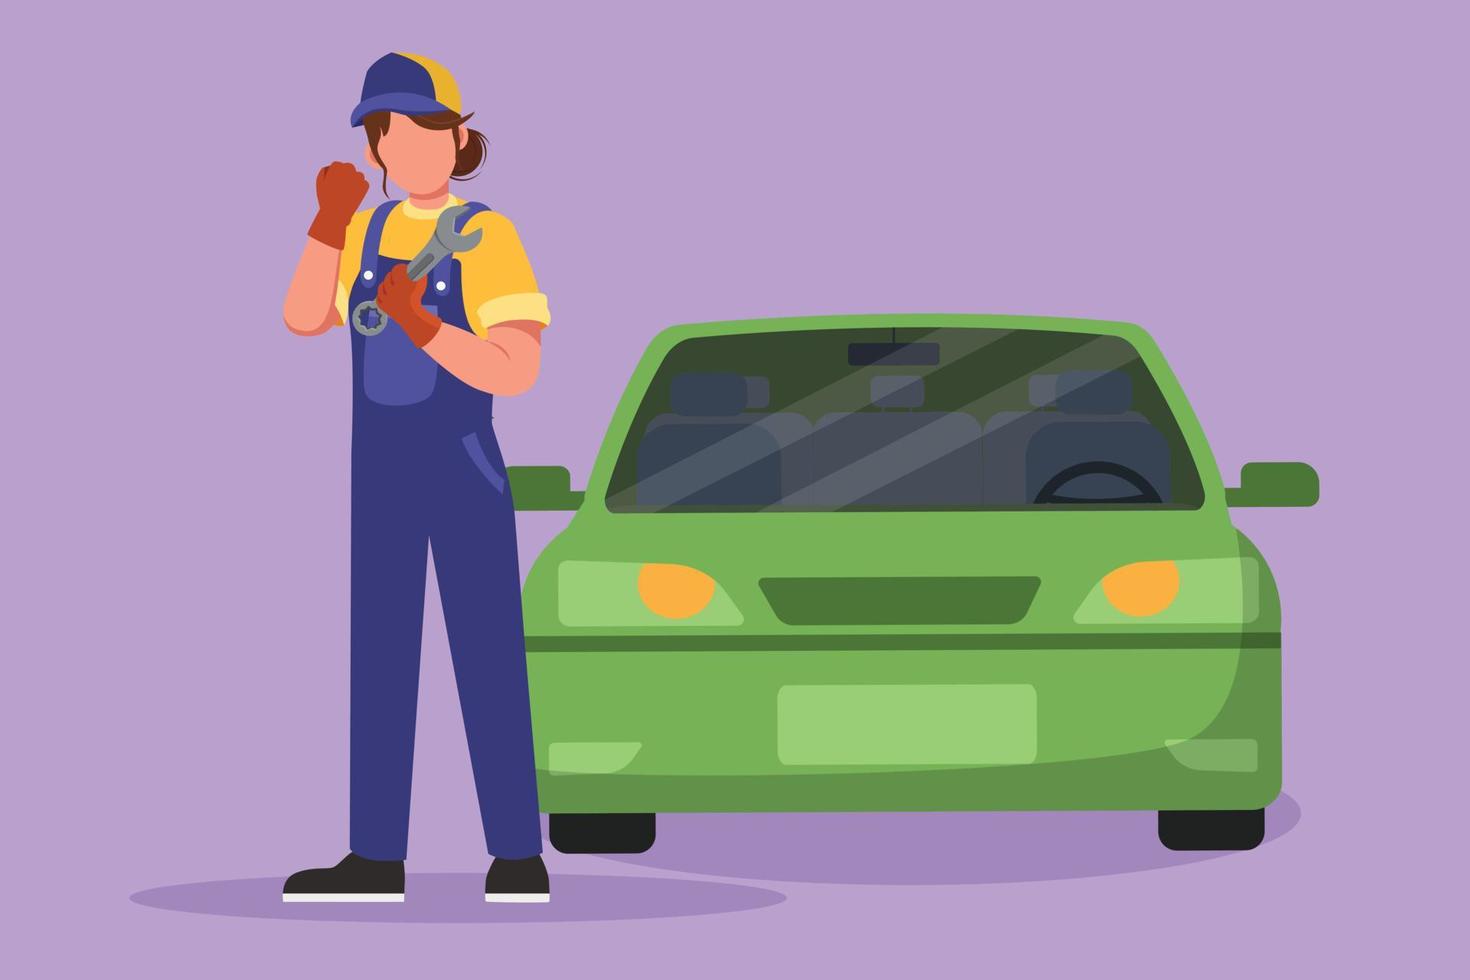 Character flat drawing female mechanic standing in front of car with celebrate gesture and holding wrench to perform maintenance on vehicle engine or transportation. Cartoon design vector illustration